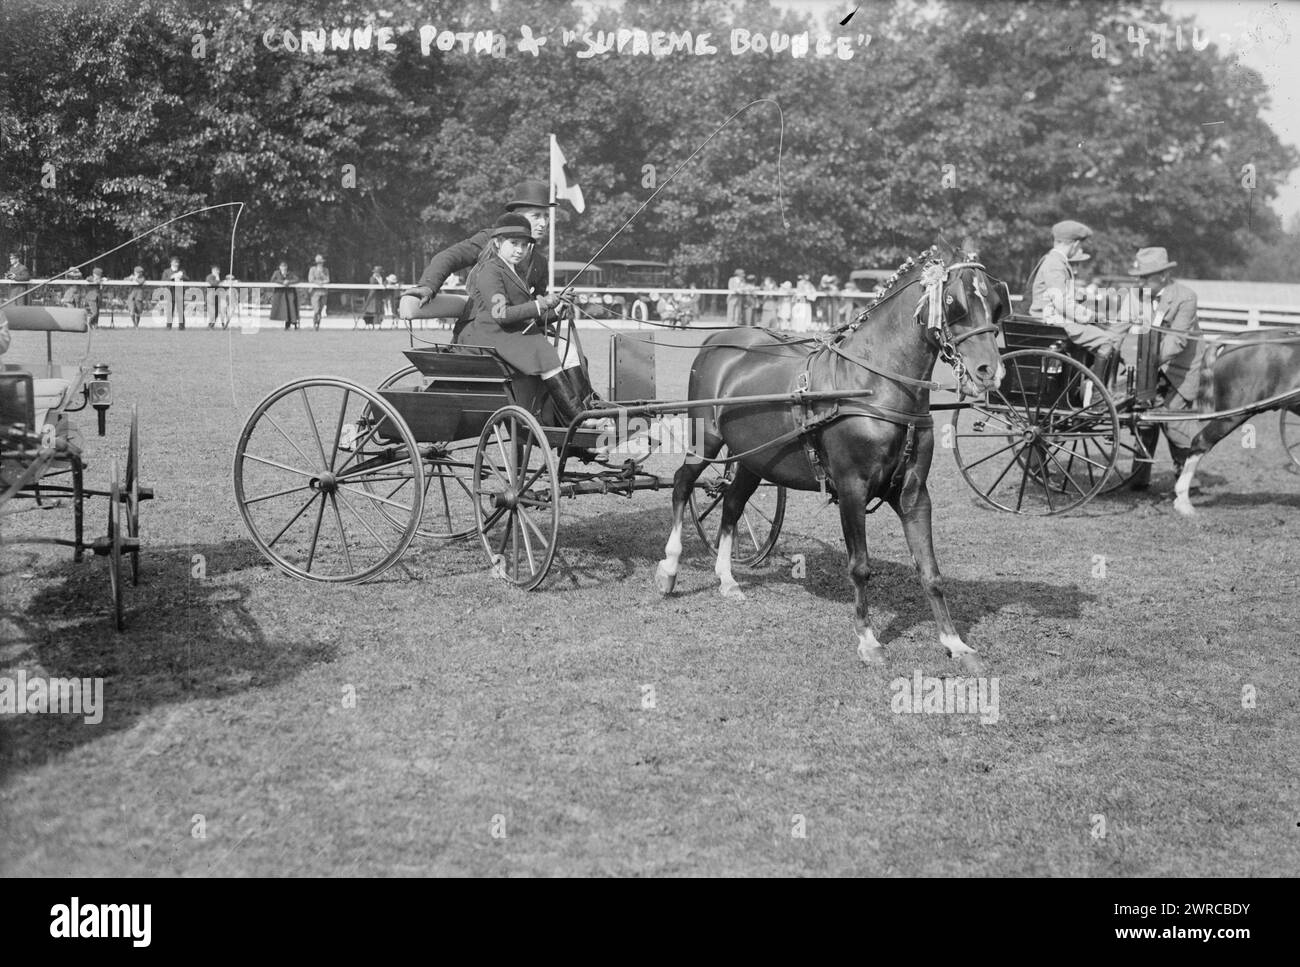 Corinne Poth & 'Supreme Bounce', Photograph shows Corinne Poth seated in carriage during a horse event at the Piping Rock Club horse show, Locust Valley, New York State, which took place on Sept. 28, 1918., 1918 Sept. 28, Glass negatives, 1 negative: glass Stock Photo